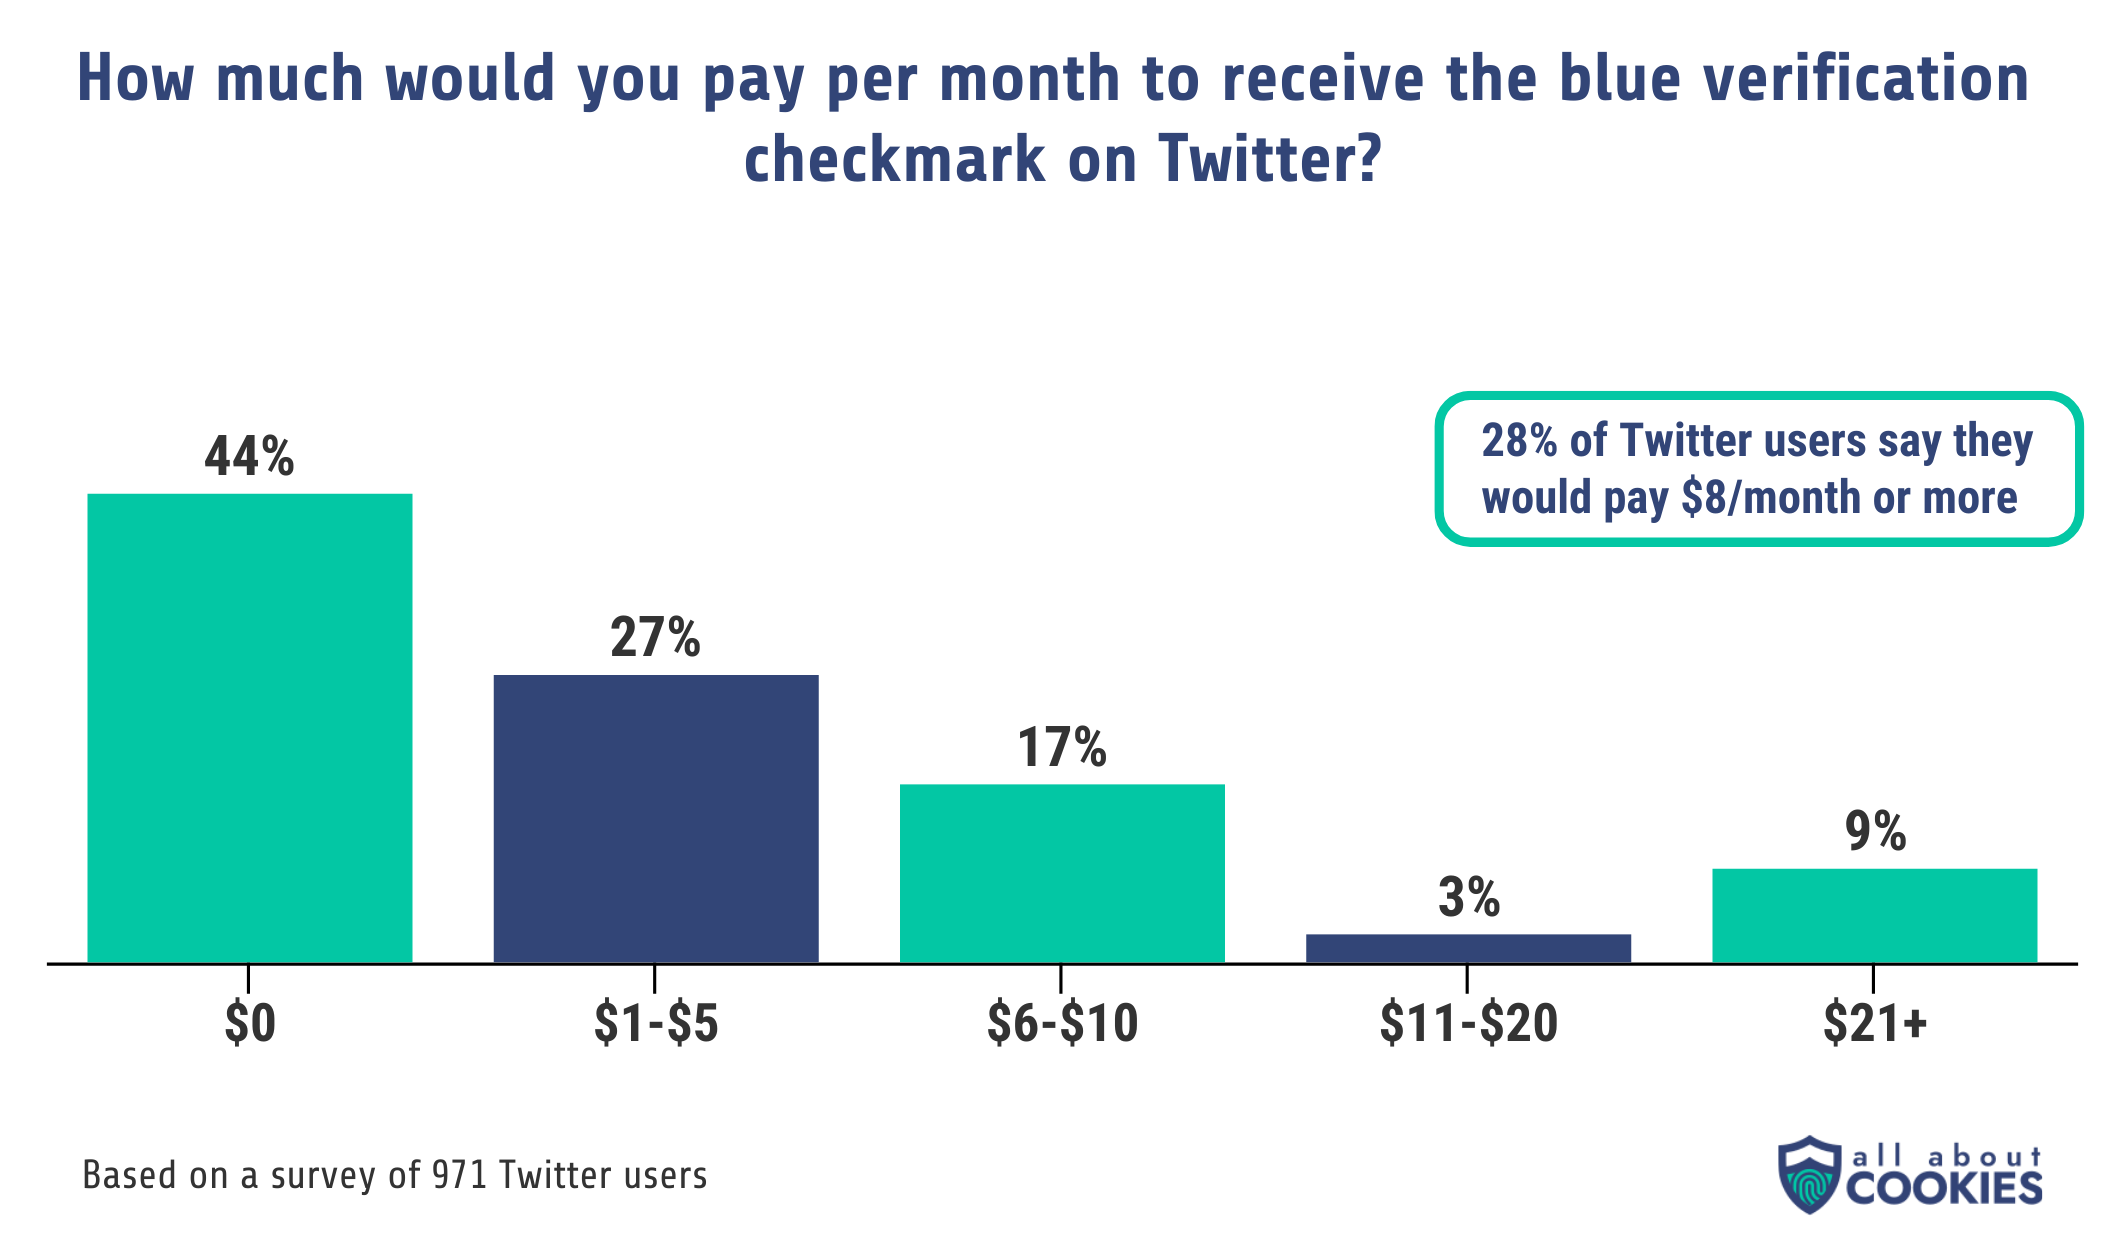 Most Twitter users wouldn't pay any price to get the verification checkmark on their profile, while 28% of users would pay Musk's proposed price of $8 a month or more.